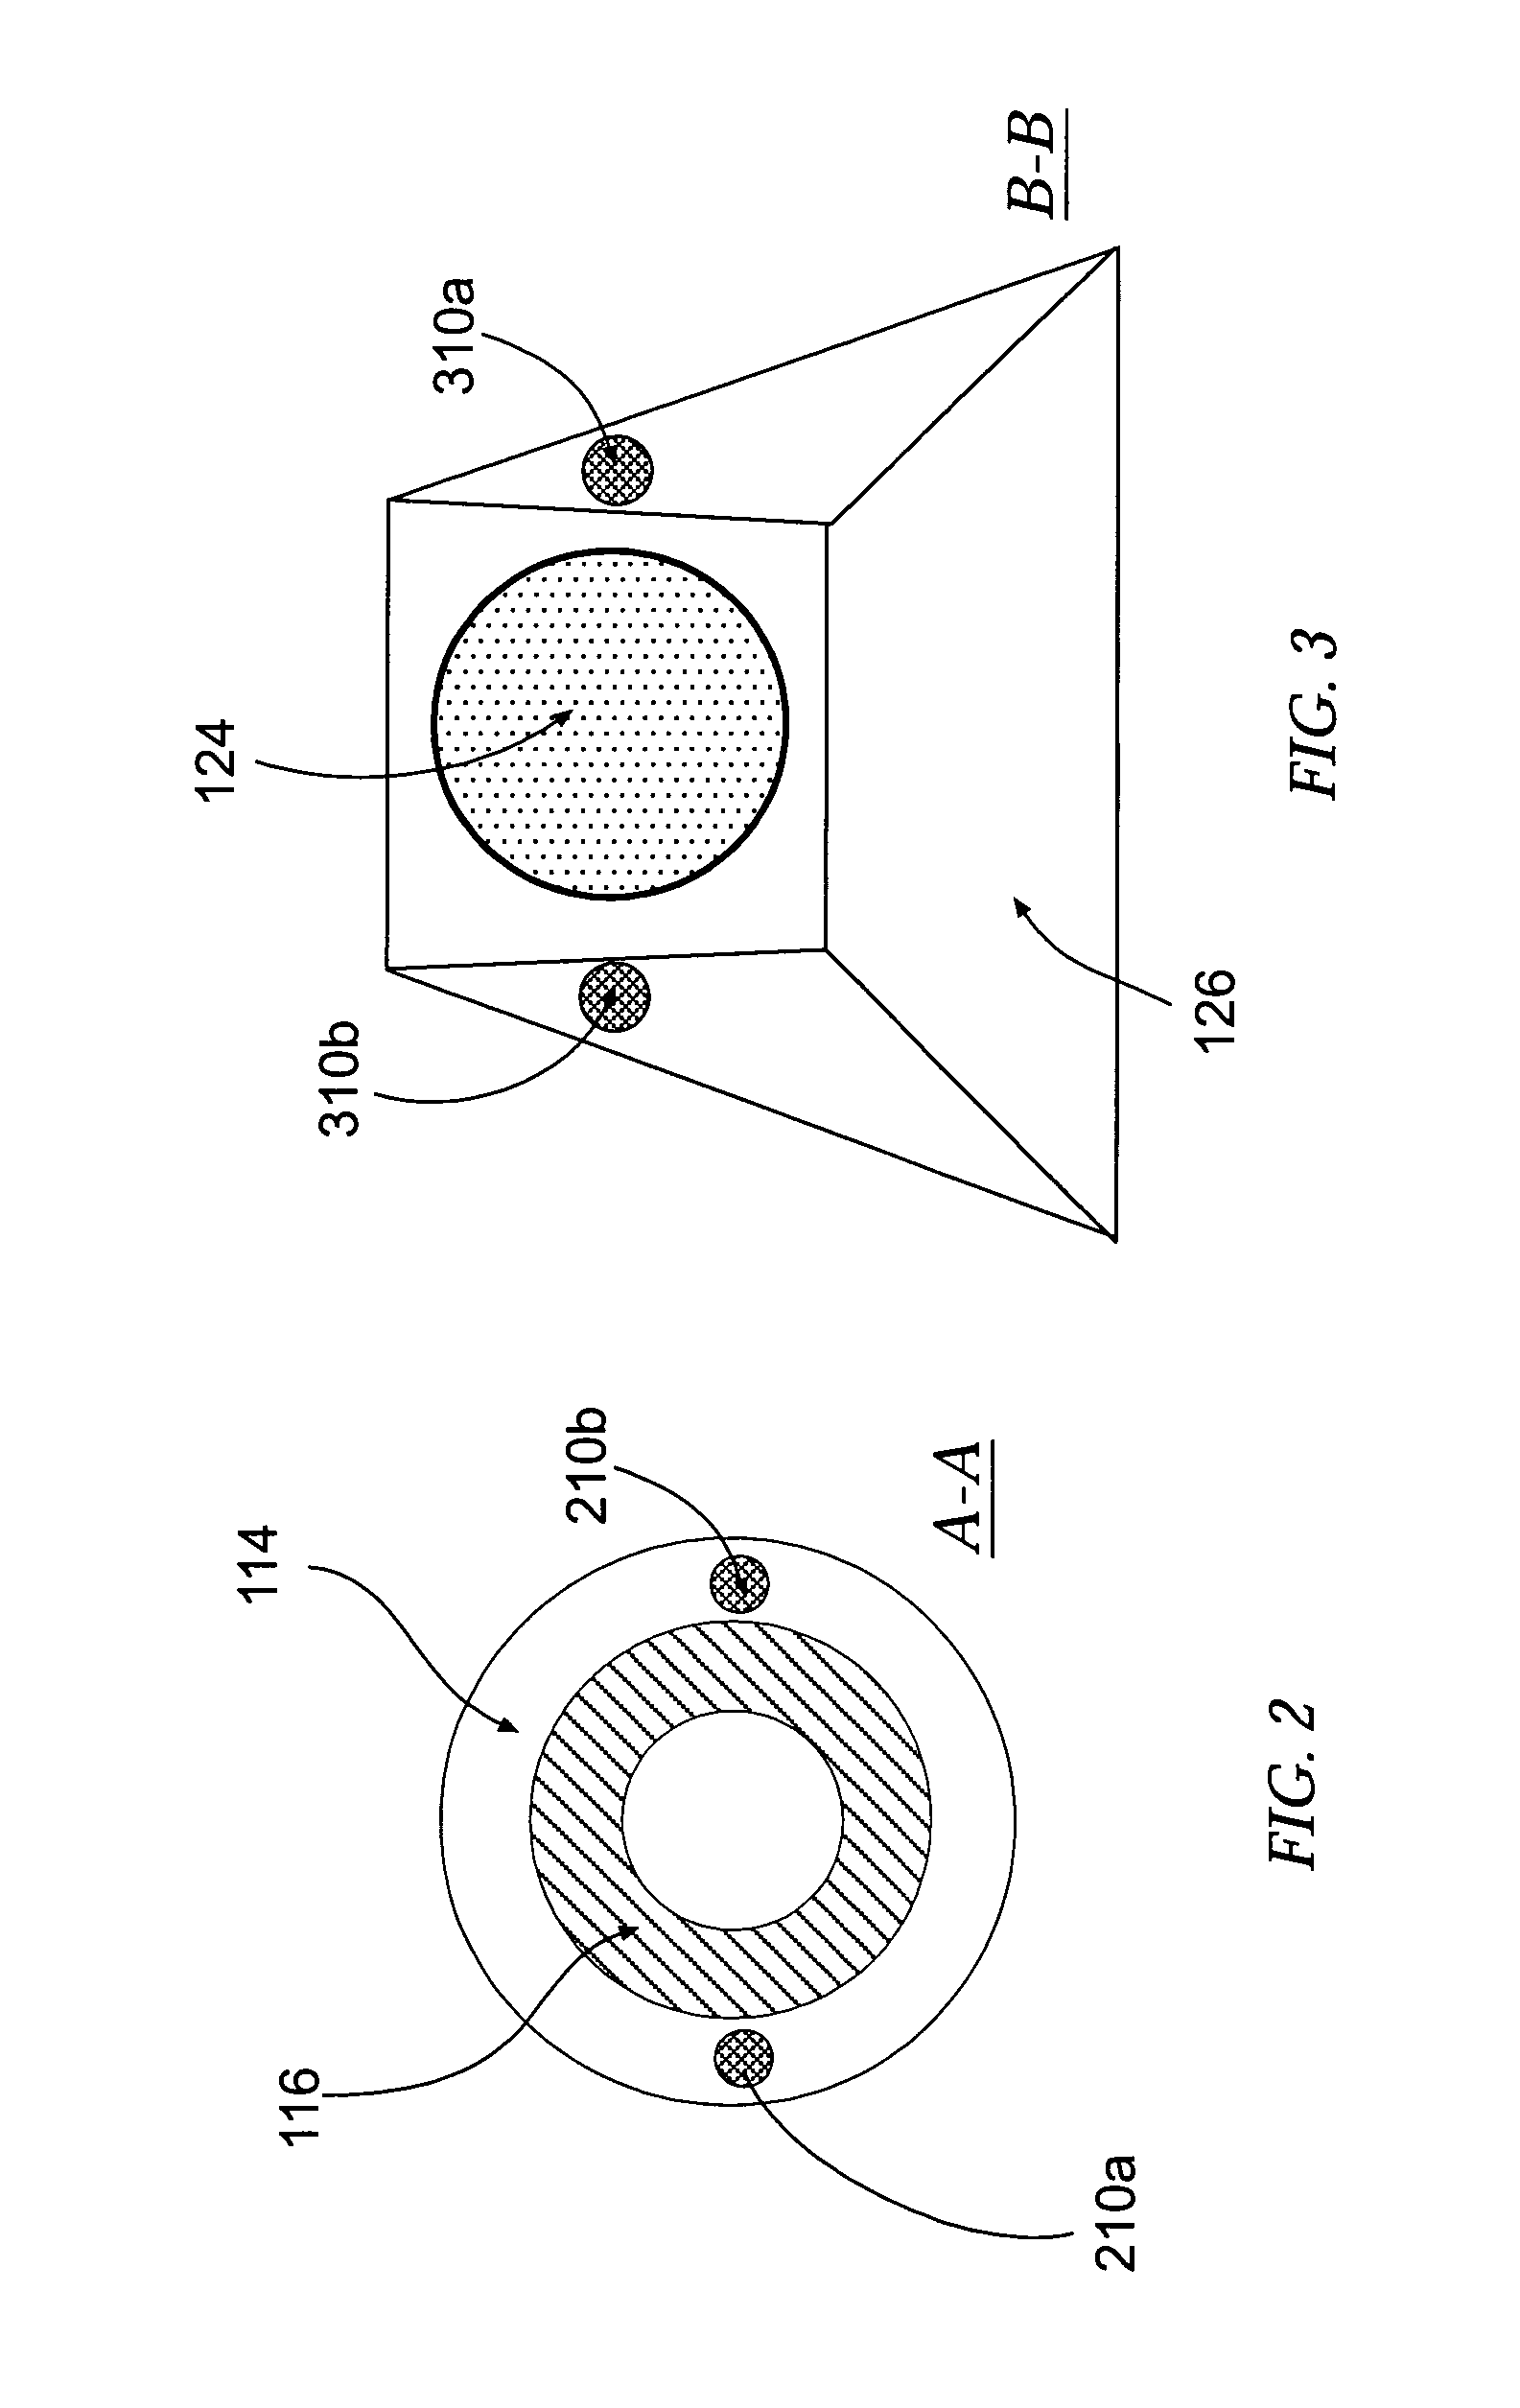 In-flight refueling system, alignment system, and method for automatic alignment and engagement of an in-flight refueling boom